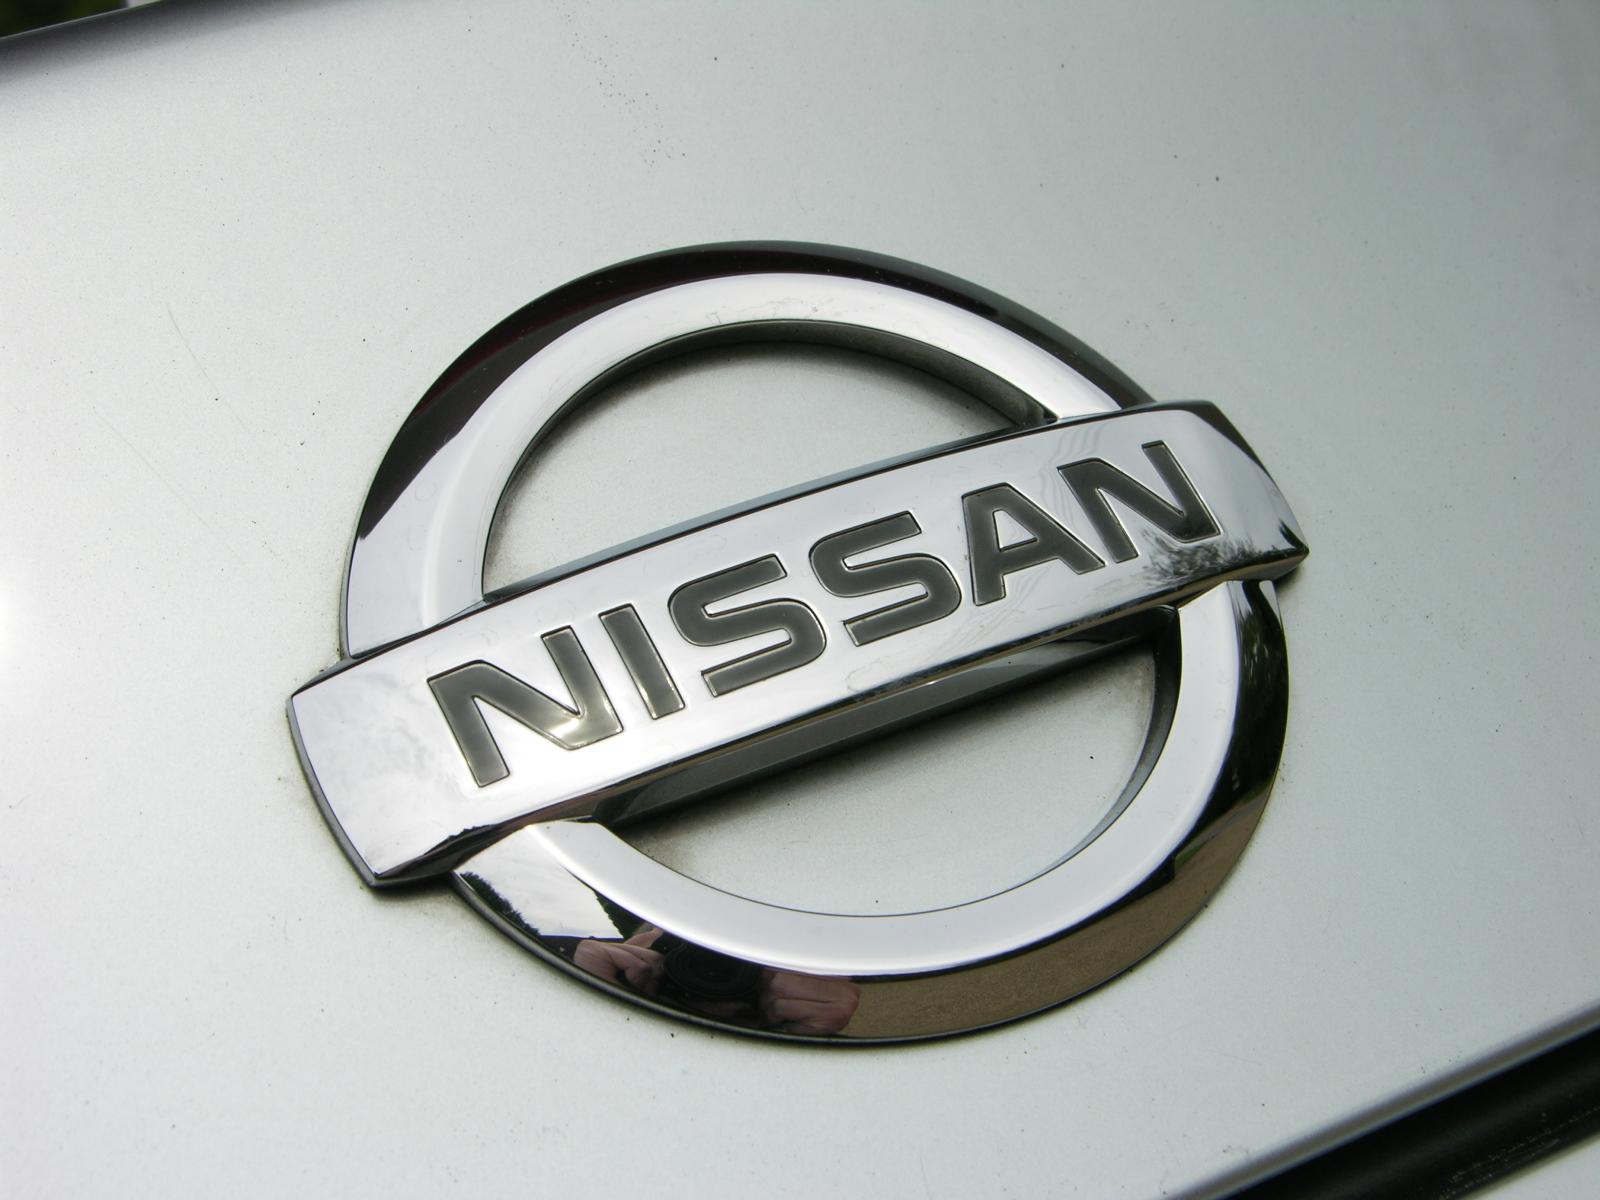 Nissan Logo Wallpaper Adorable HDq Background Of